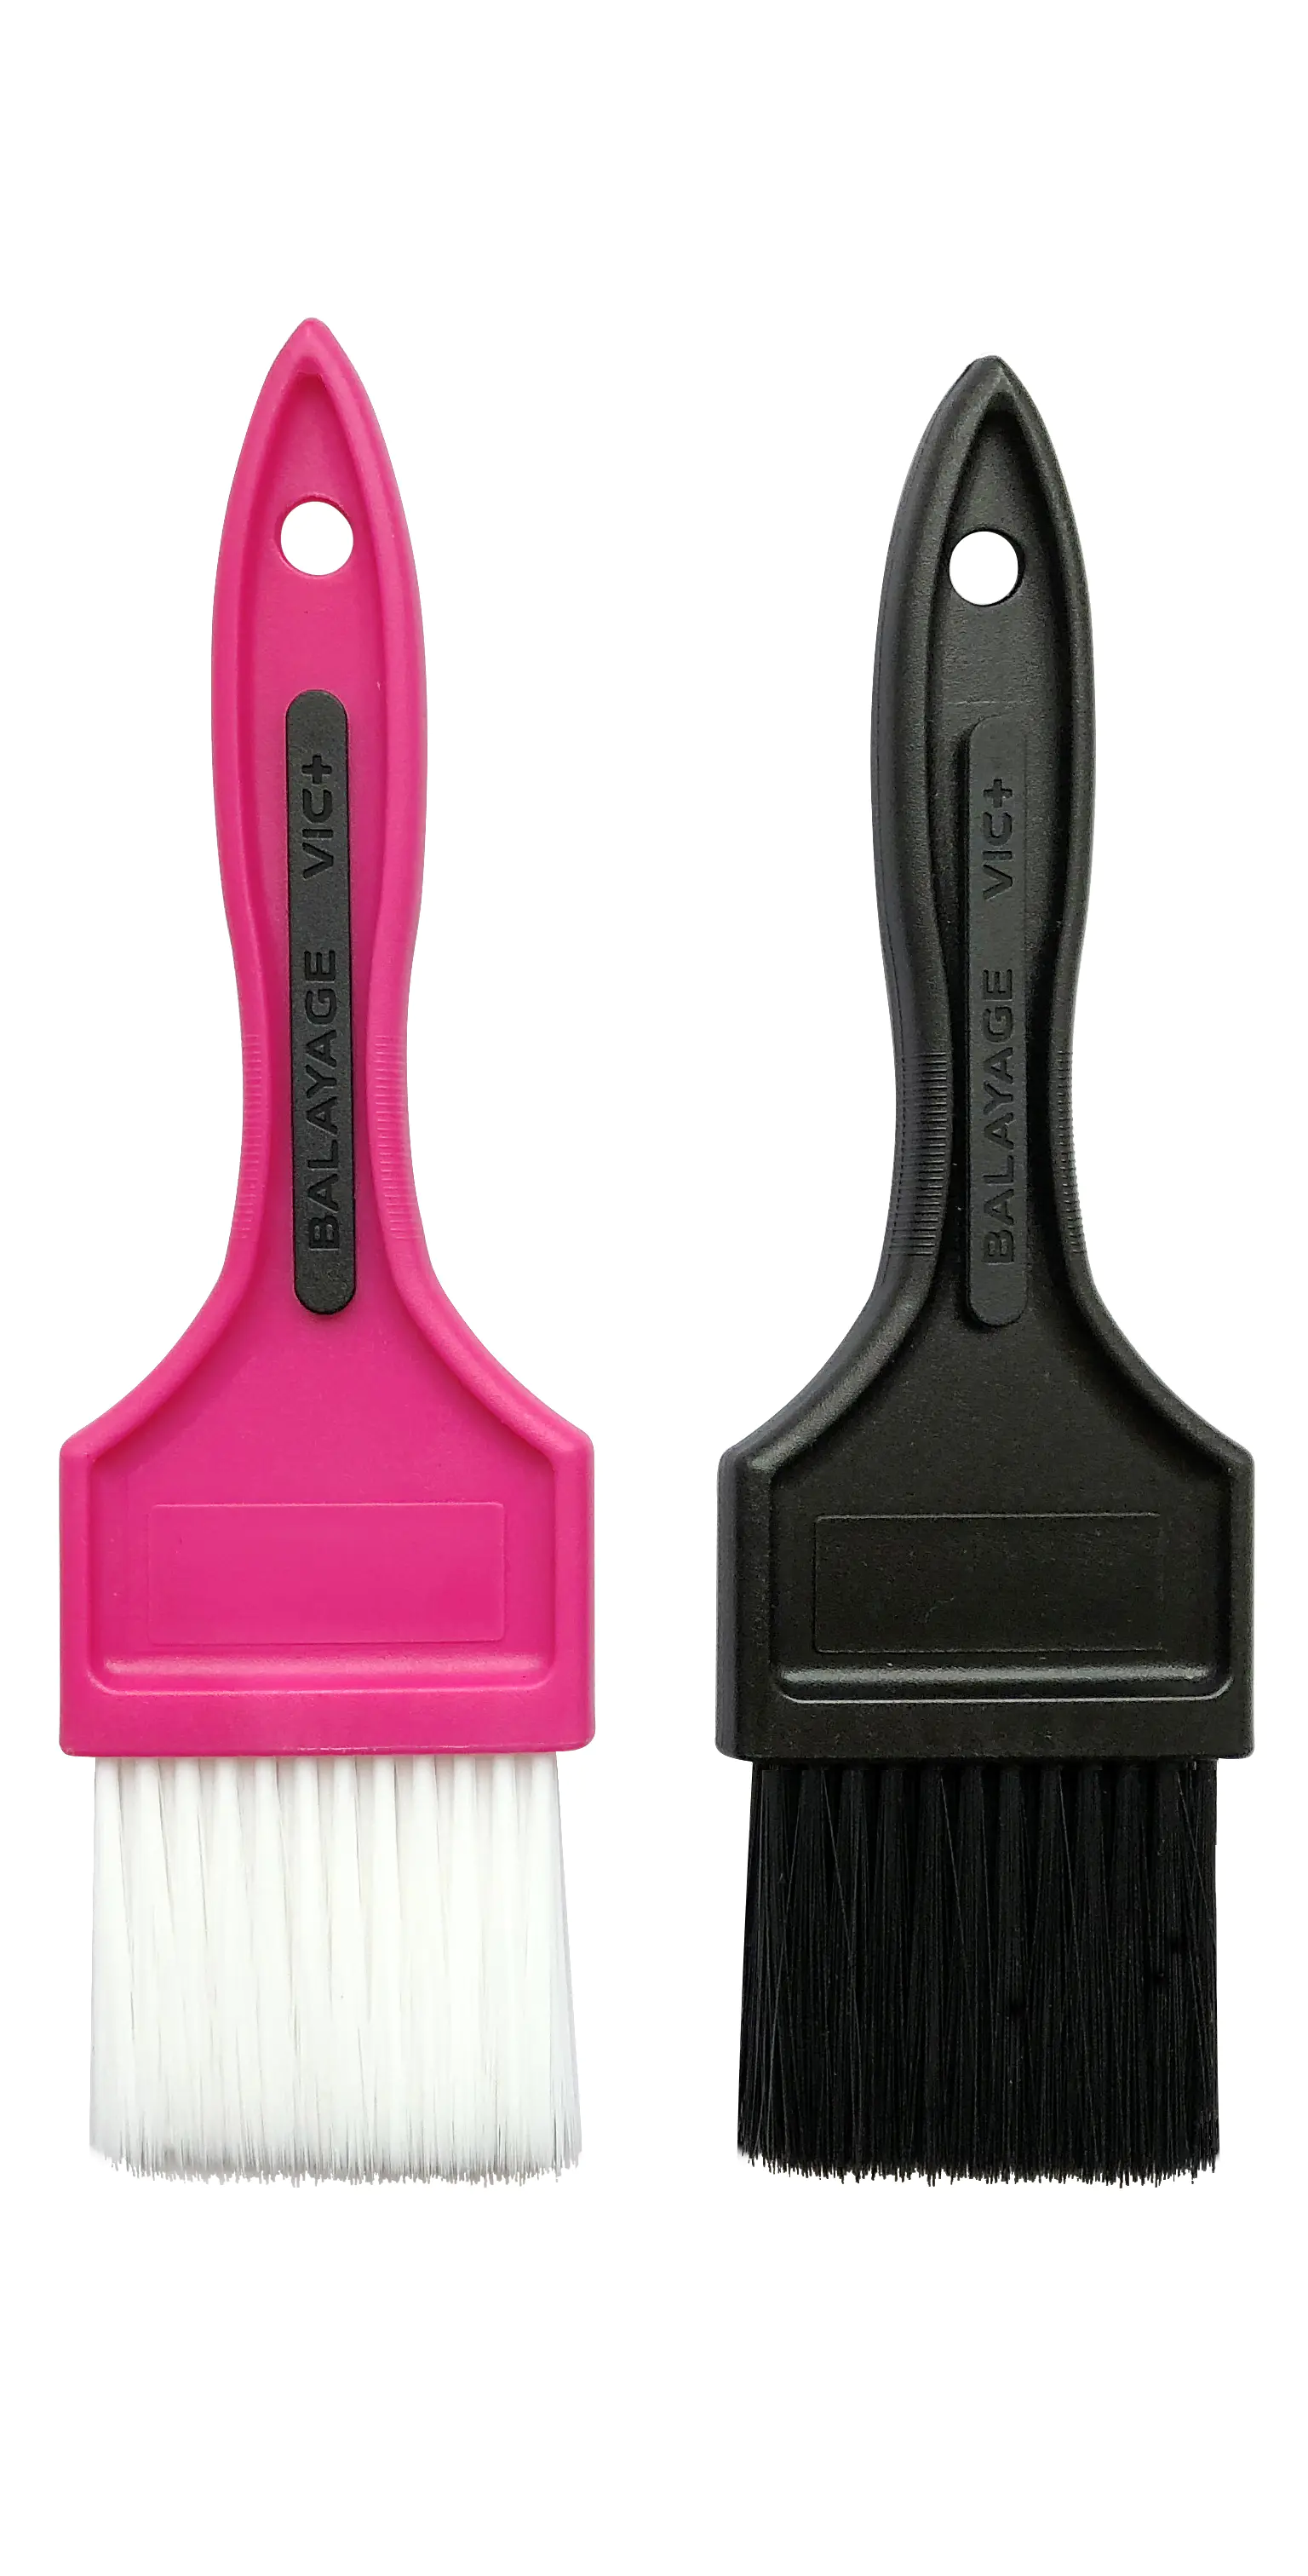 Hair Dye Brush Hair Coloring Brush Hair Tint Brushes for Salon and Home Use